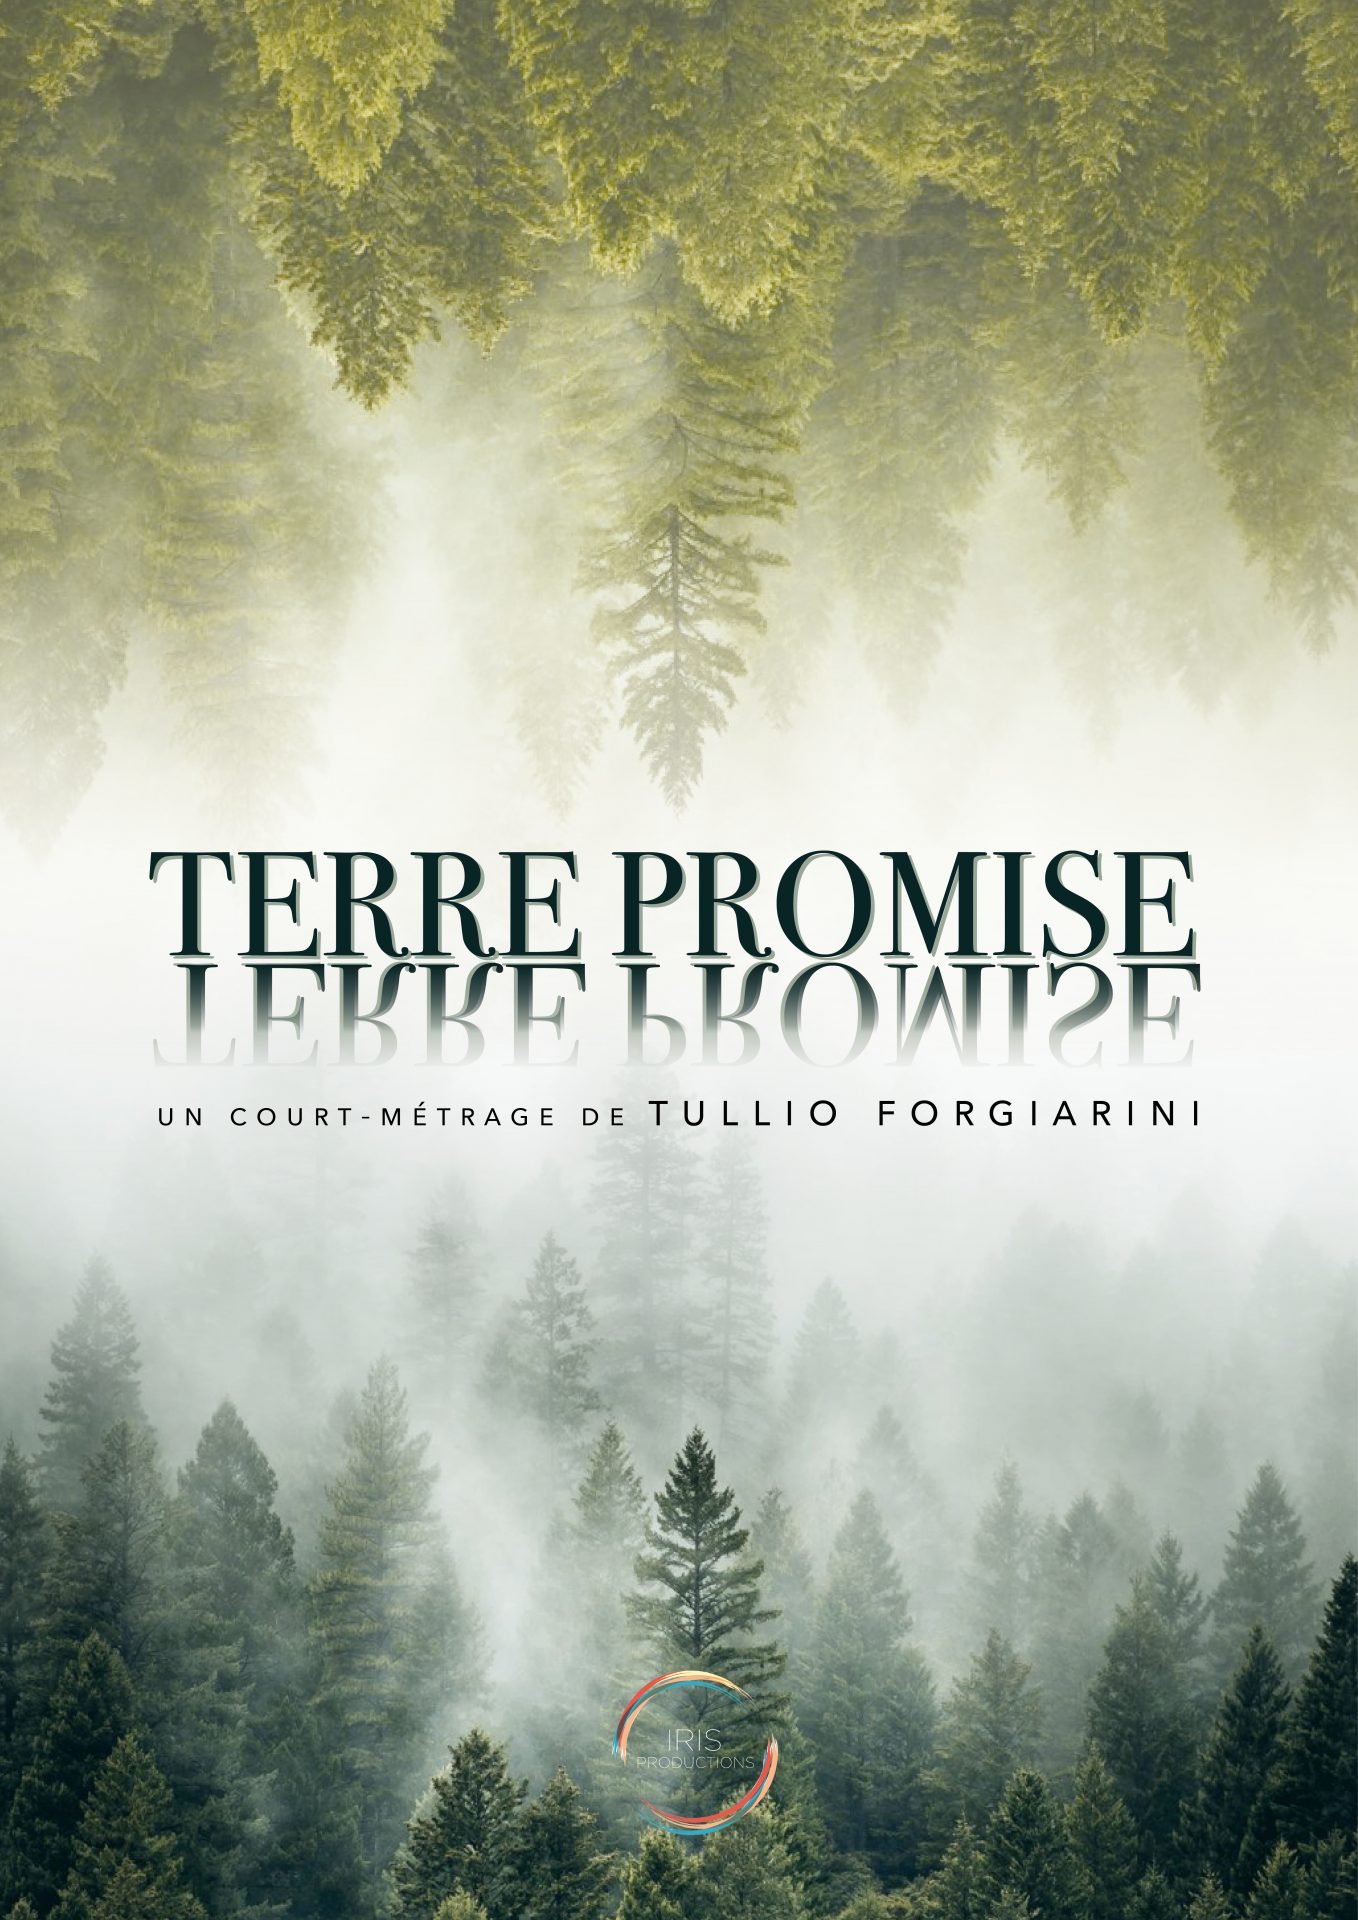 TERRE PROMISE – CURRENTLY IN POST-PRODUCTION